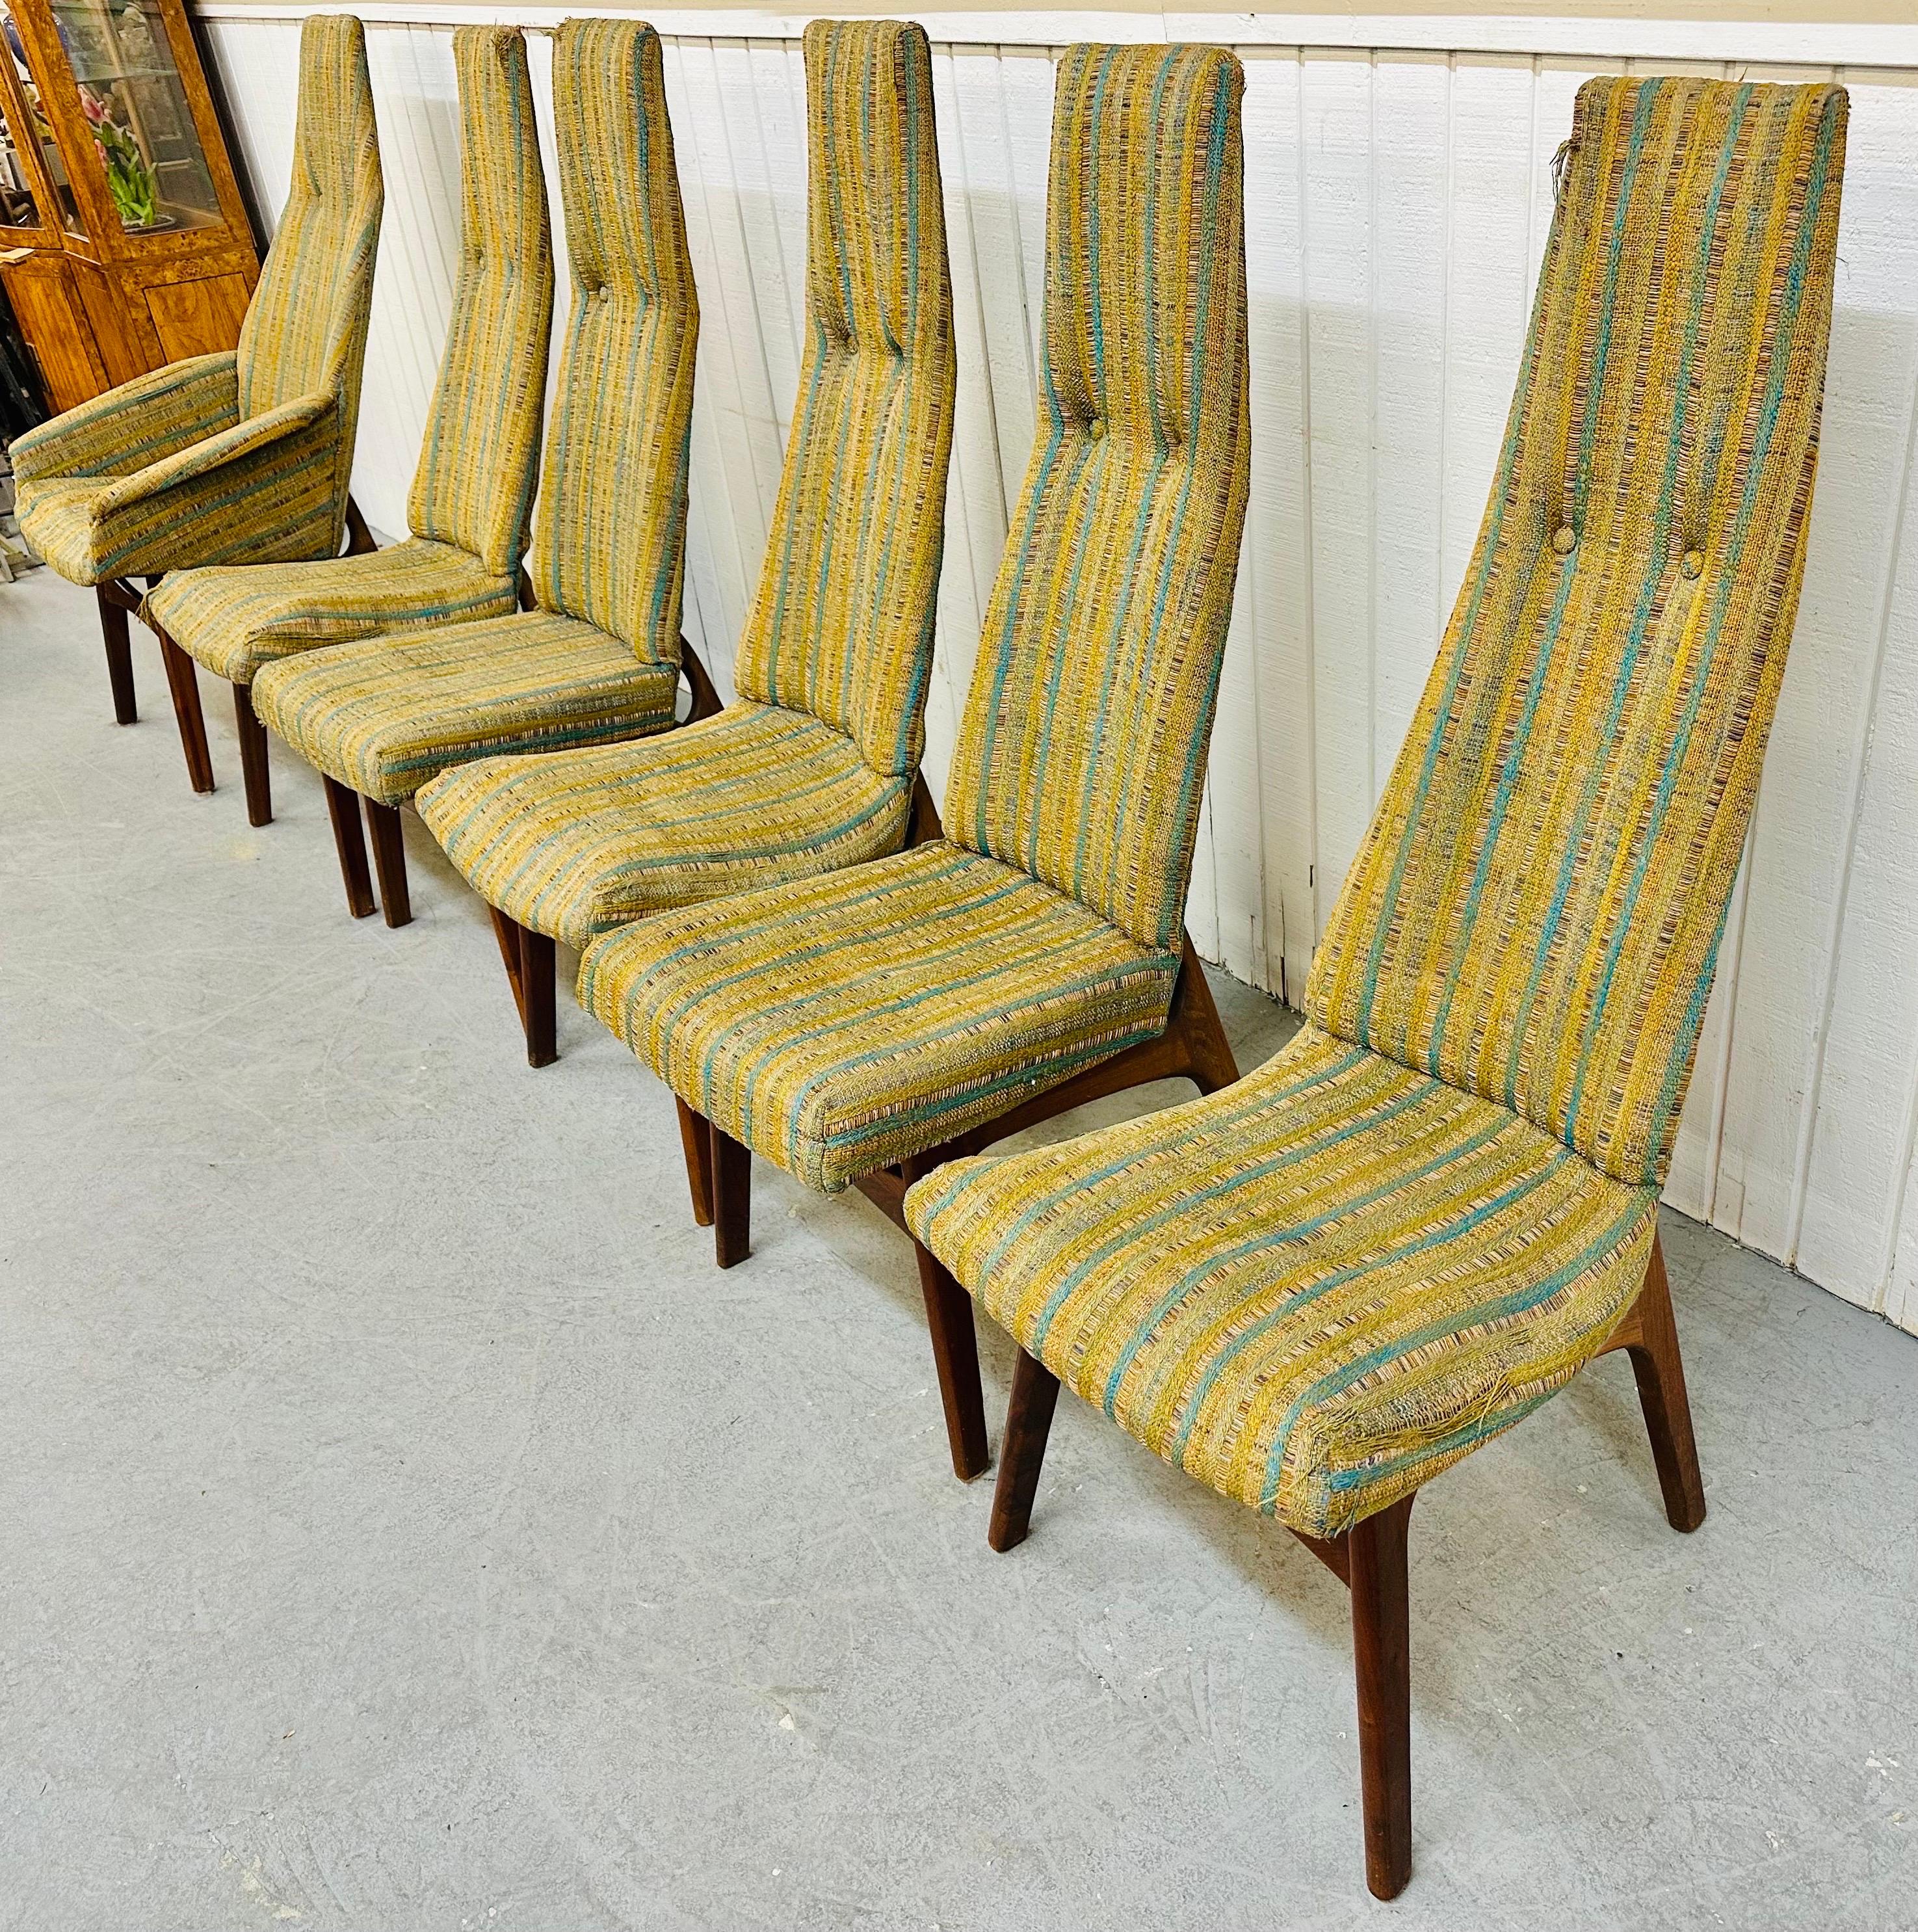 American Mid-Century Modern Adrian Pearsall High-Back Dining Chairs